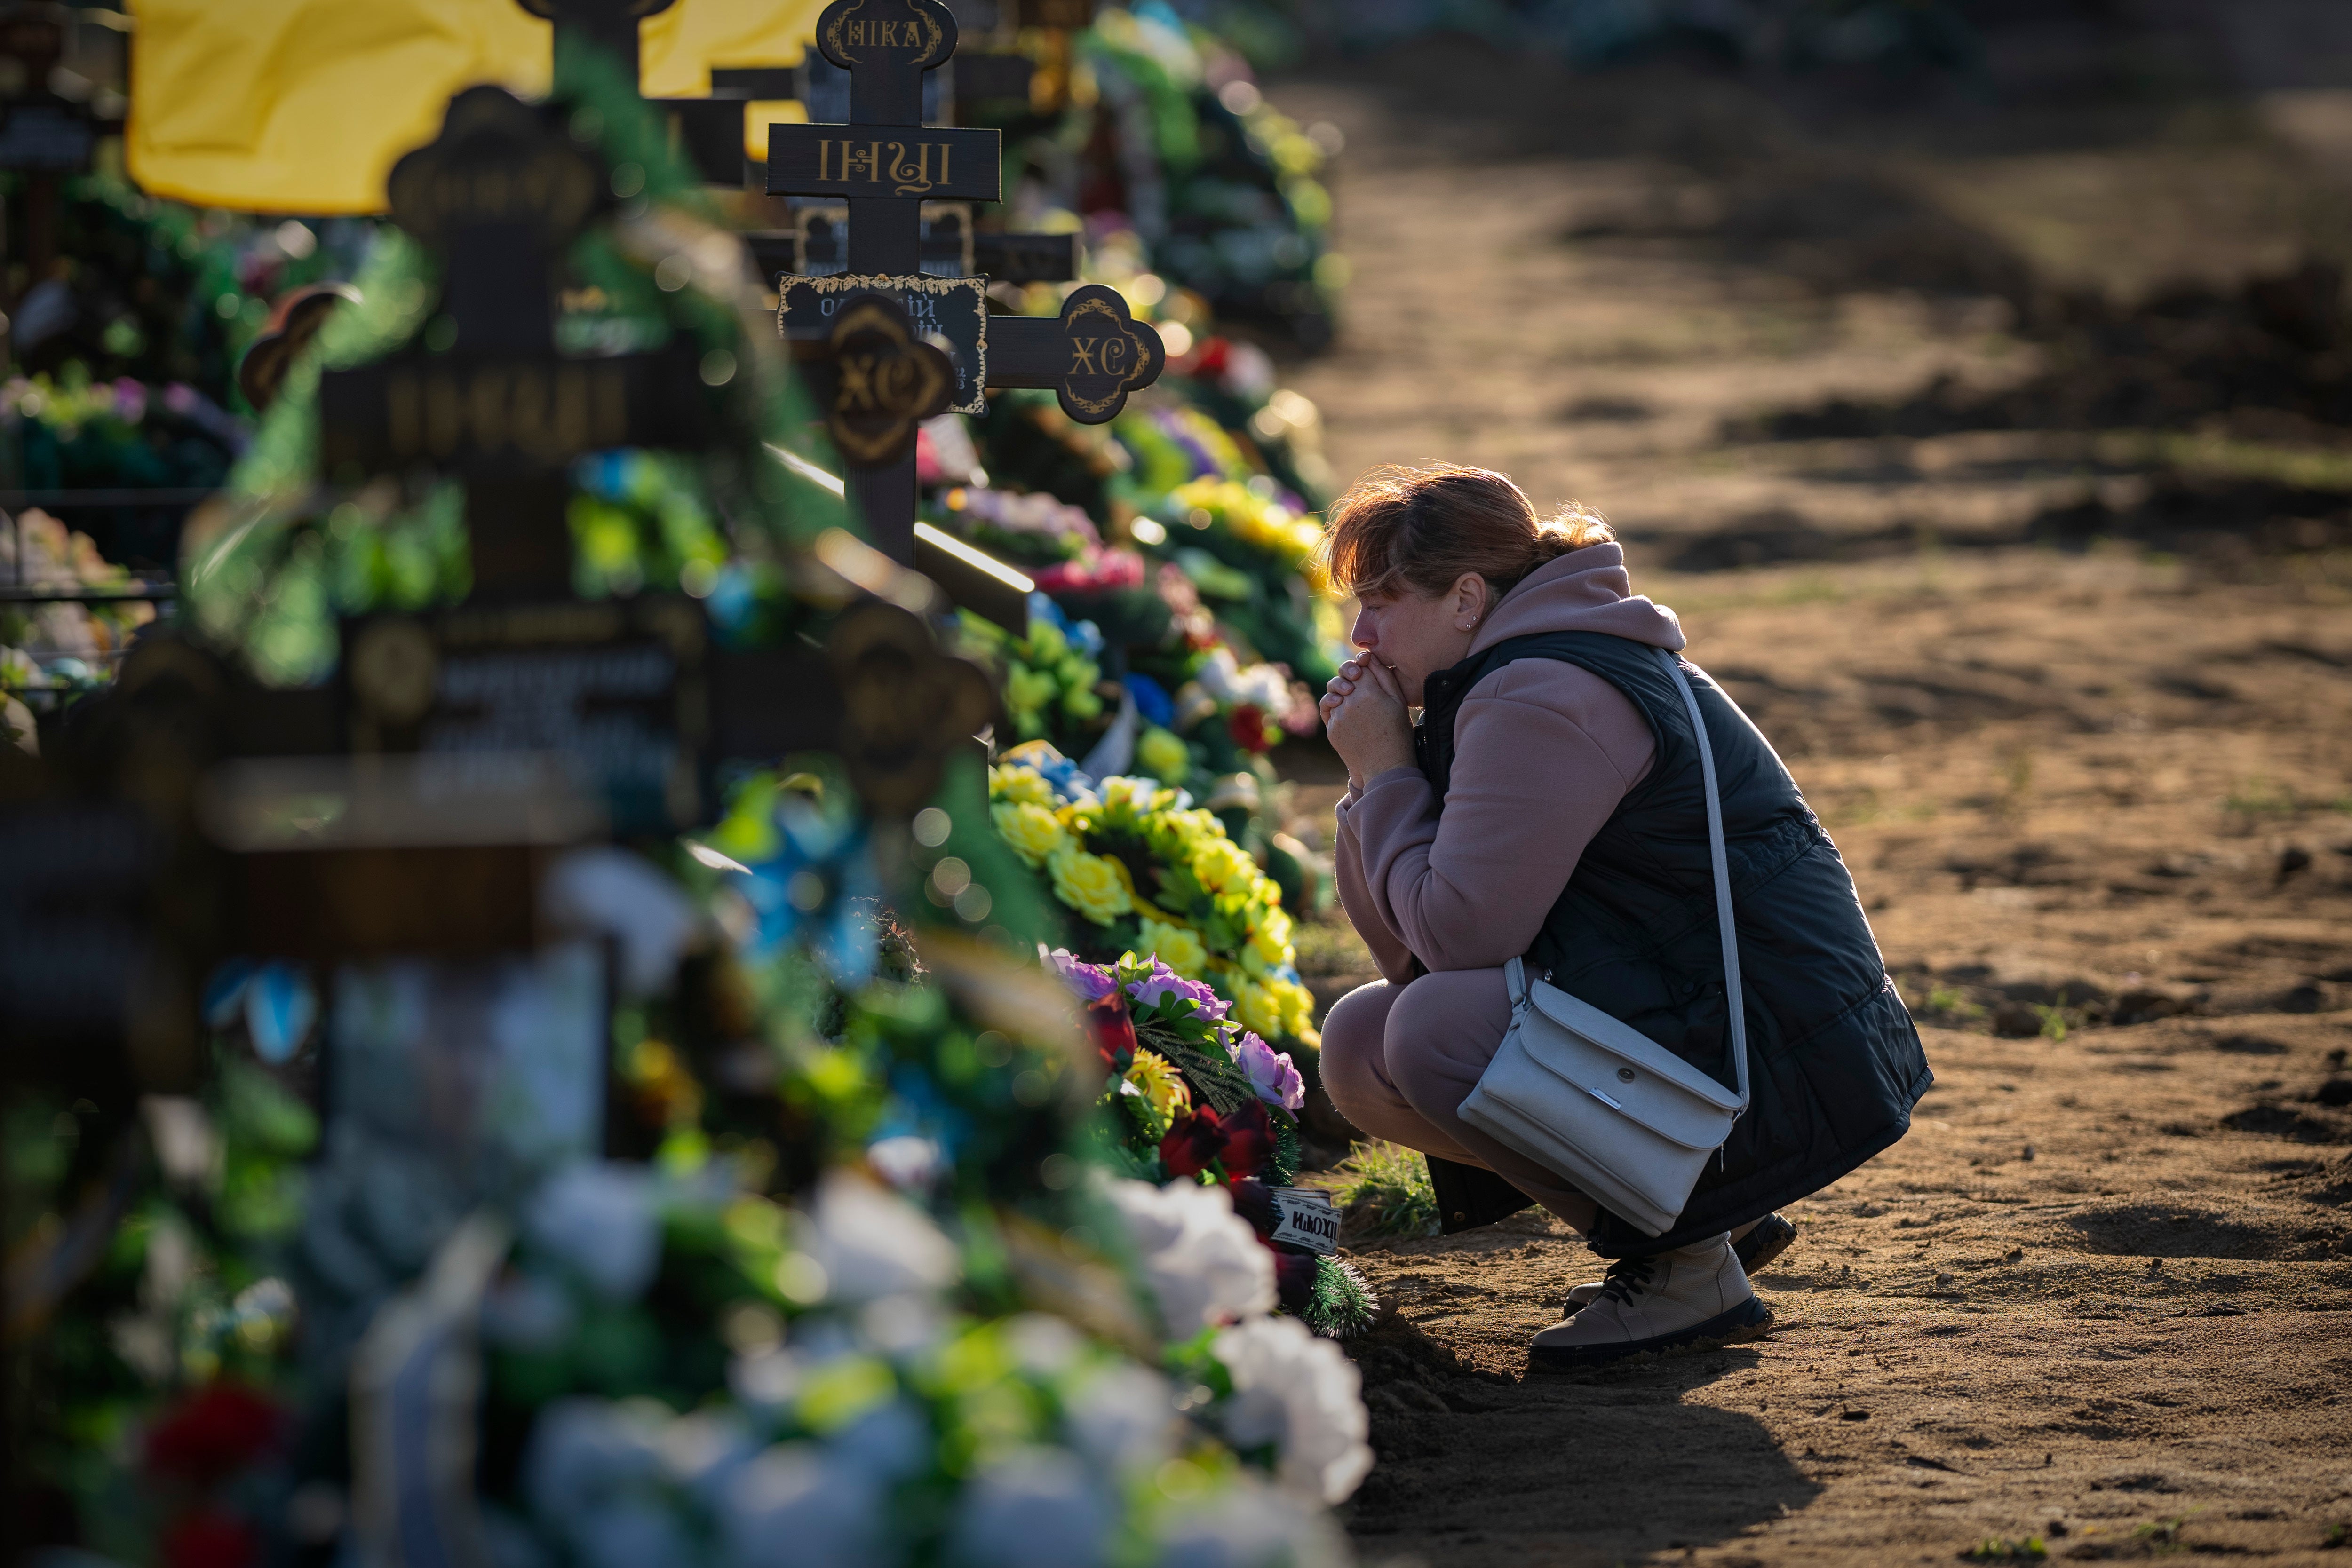 Tamara, 50, mourns at the grave of her only son, a military servicemen killed during a Russian bombing raid